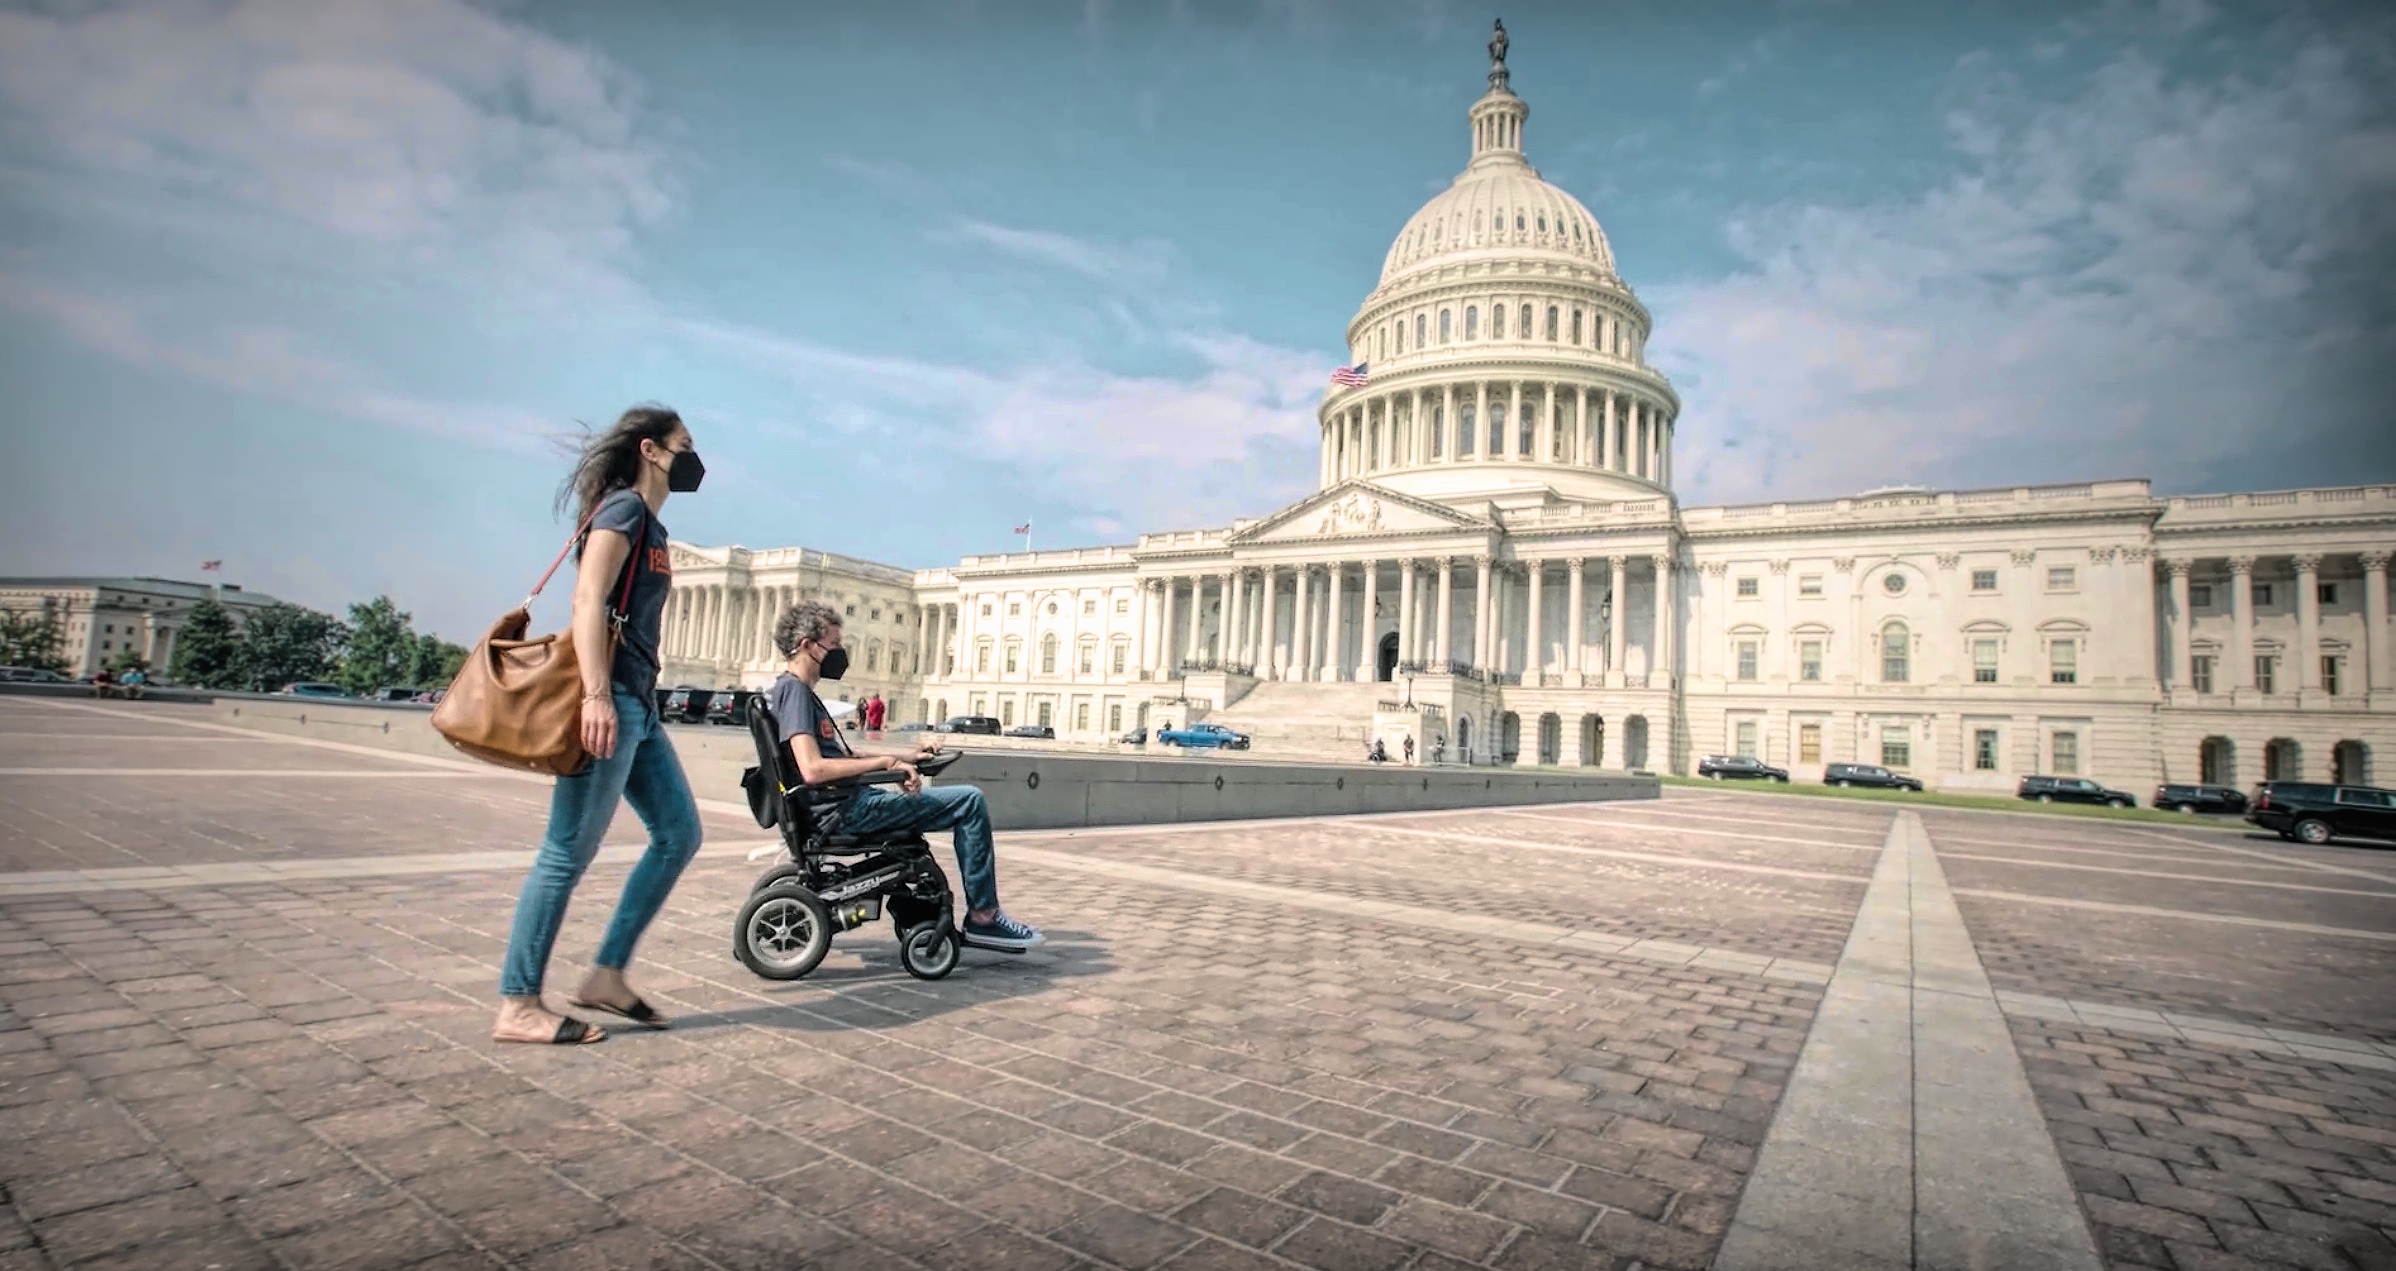 Wide film still of an ambulatory woman and a man in a wheelchair heading towards the U.S. Capitol, a cloudy blue sky above them.